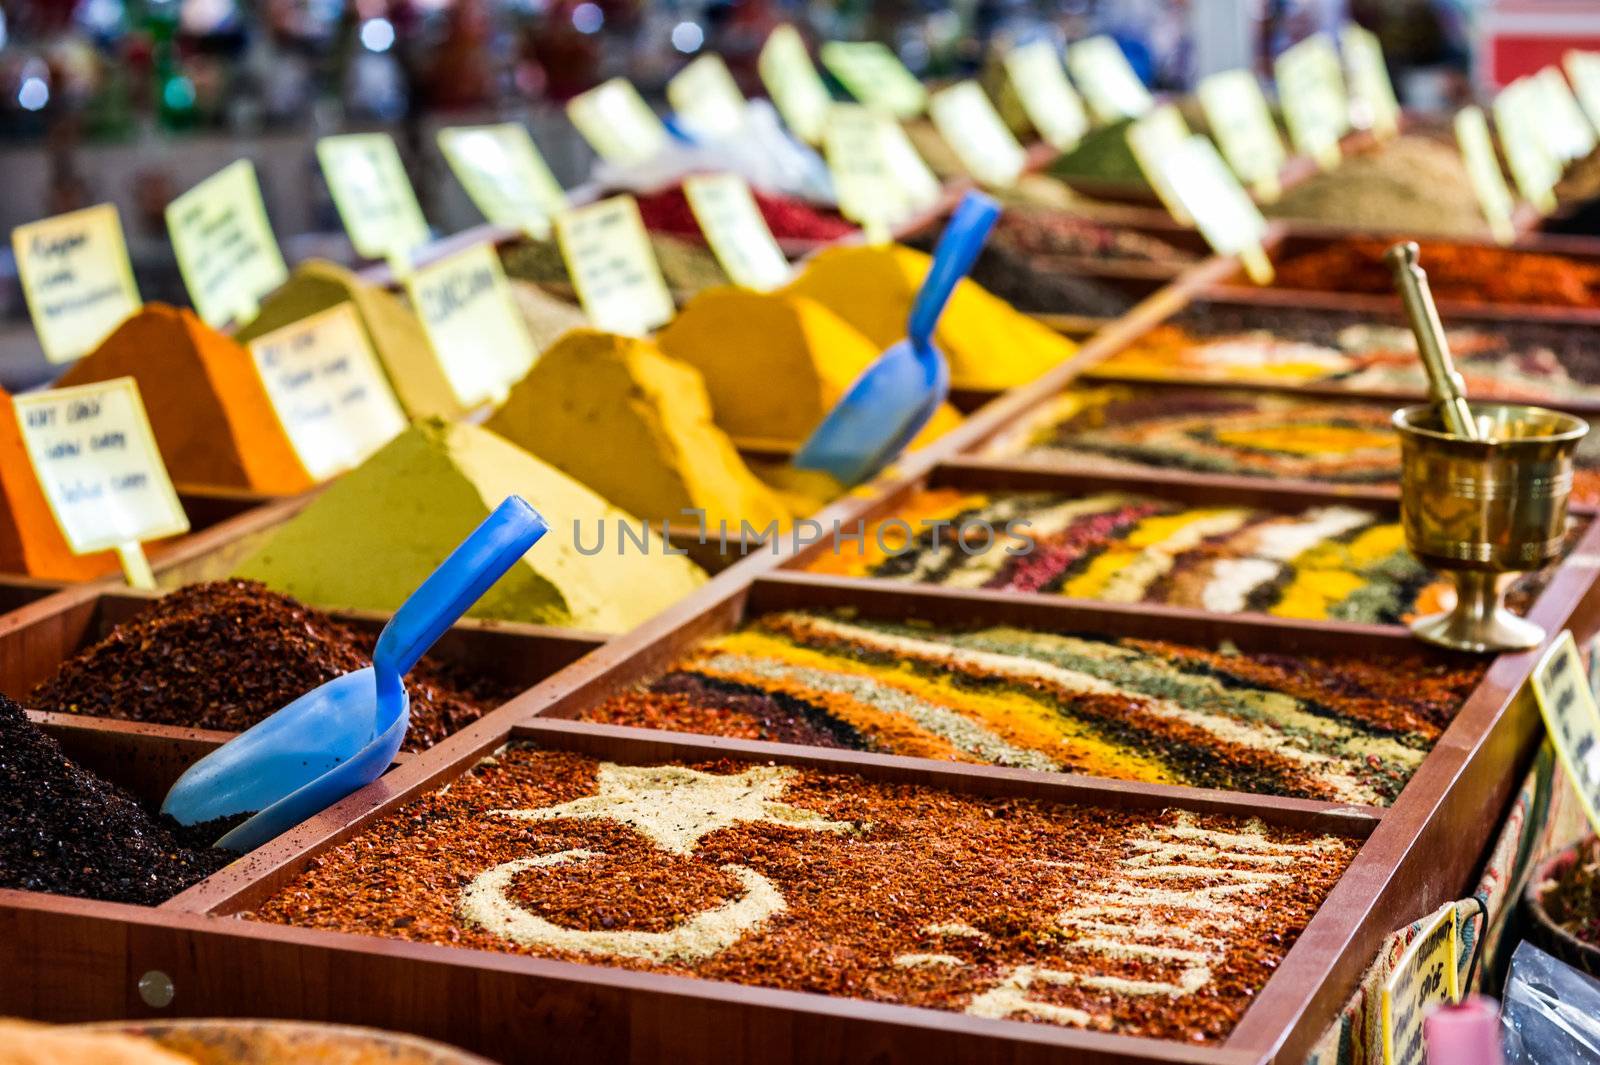 Closeup of spices on sale market by kirs-ua